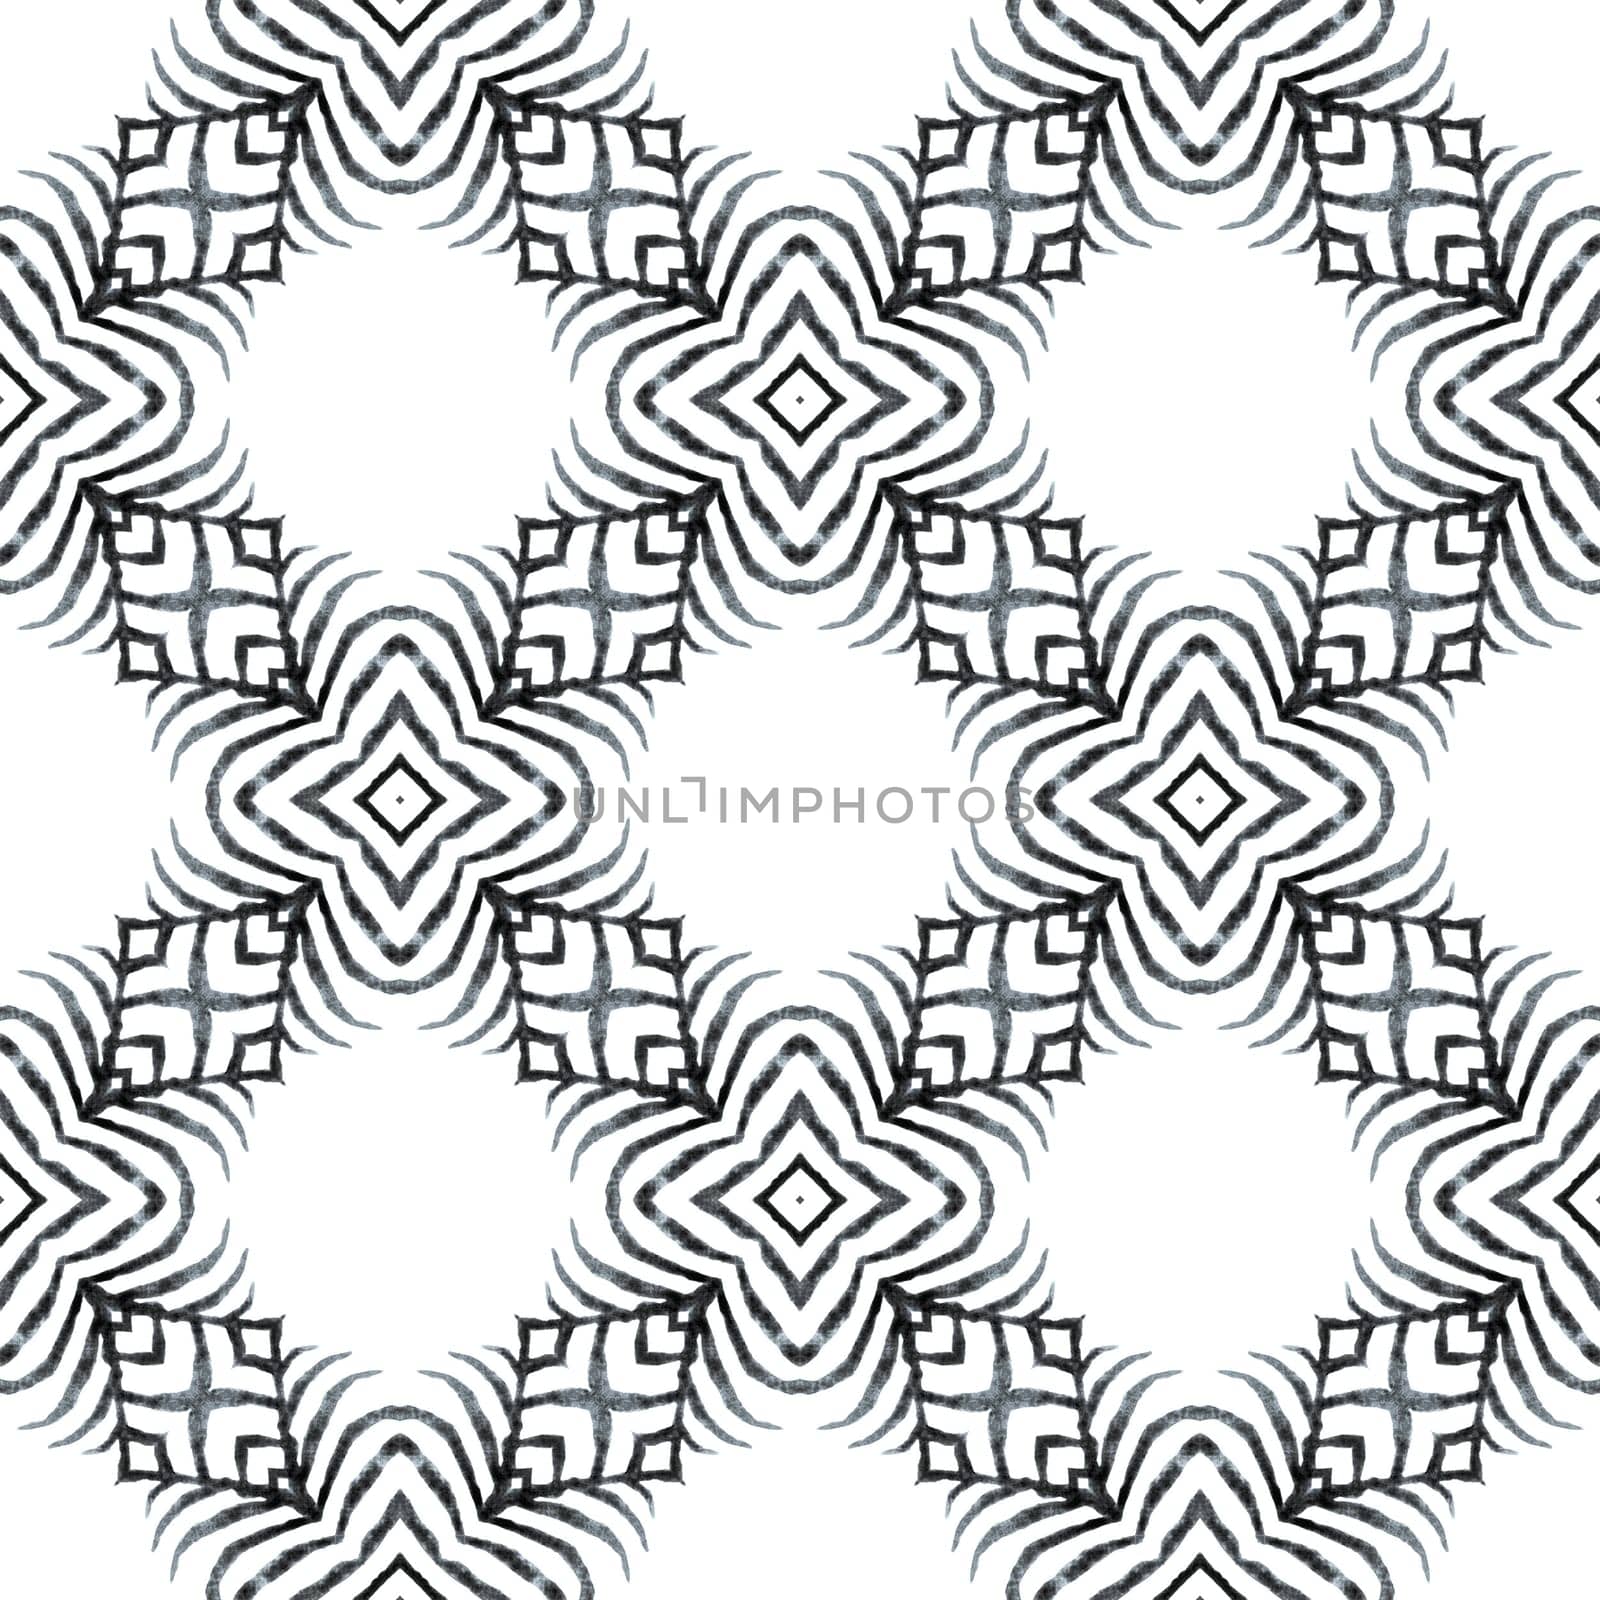 Exotic seamless pattern. Black and white indelible boho chic summer design. Textile ready worthy print, swimwear fabric, wallpaper, wrapping. Summer exotic seamless border.